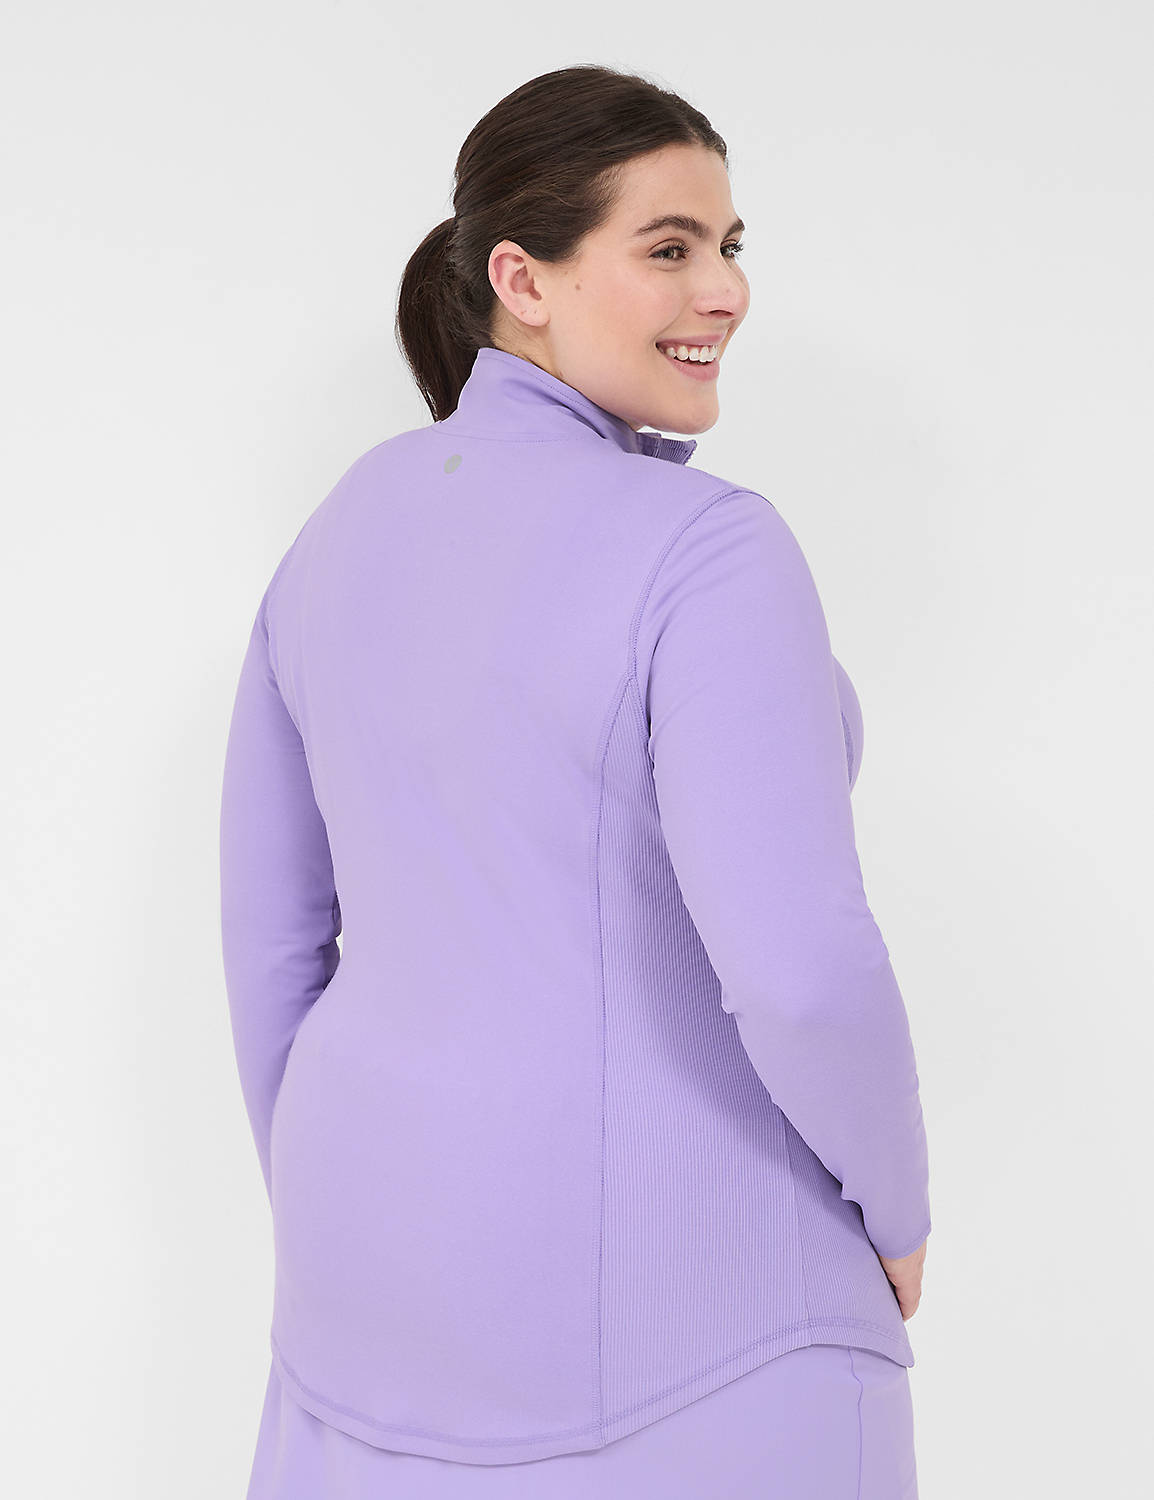 Long Sleeve Zip Front Wicking w/ Ri Product Image 2